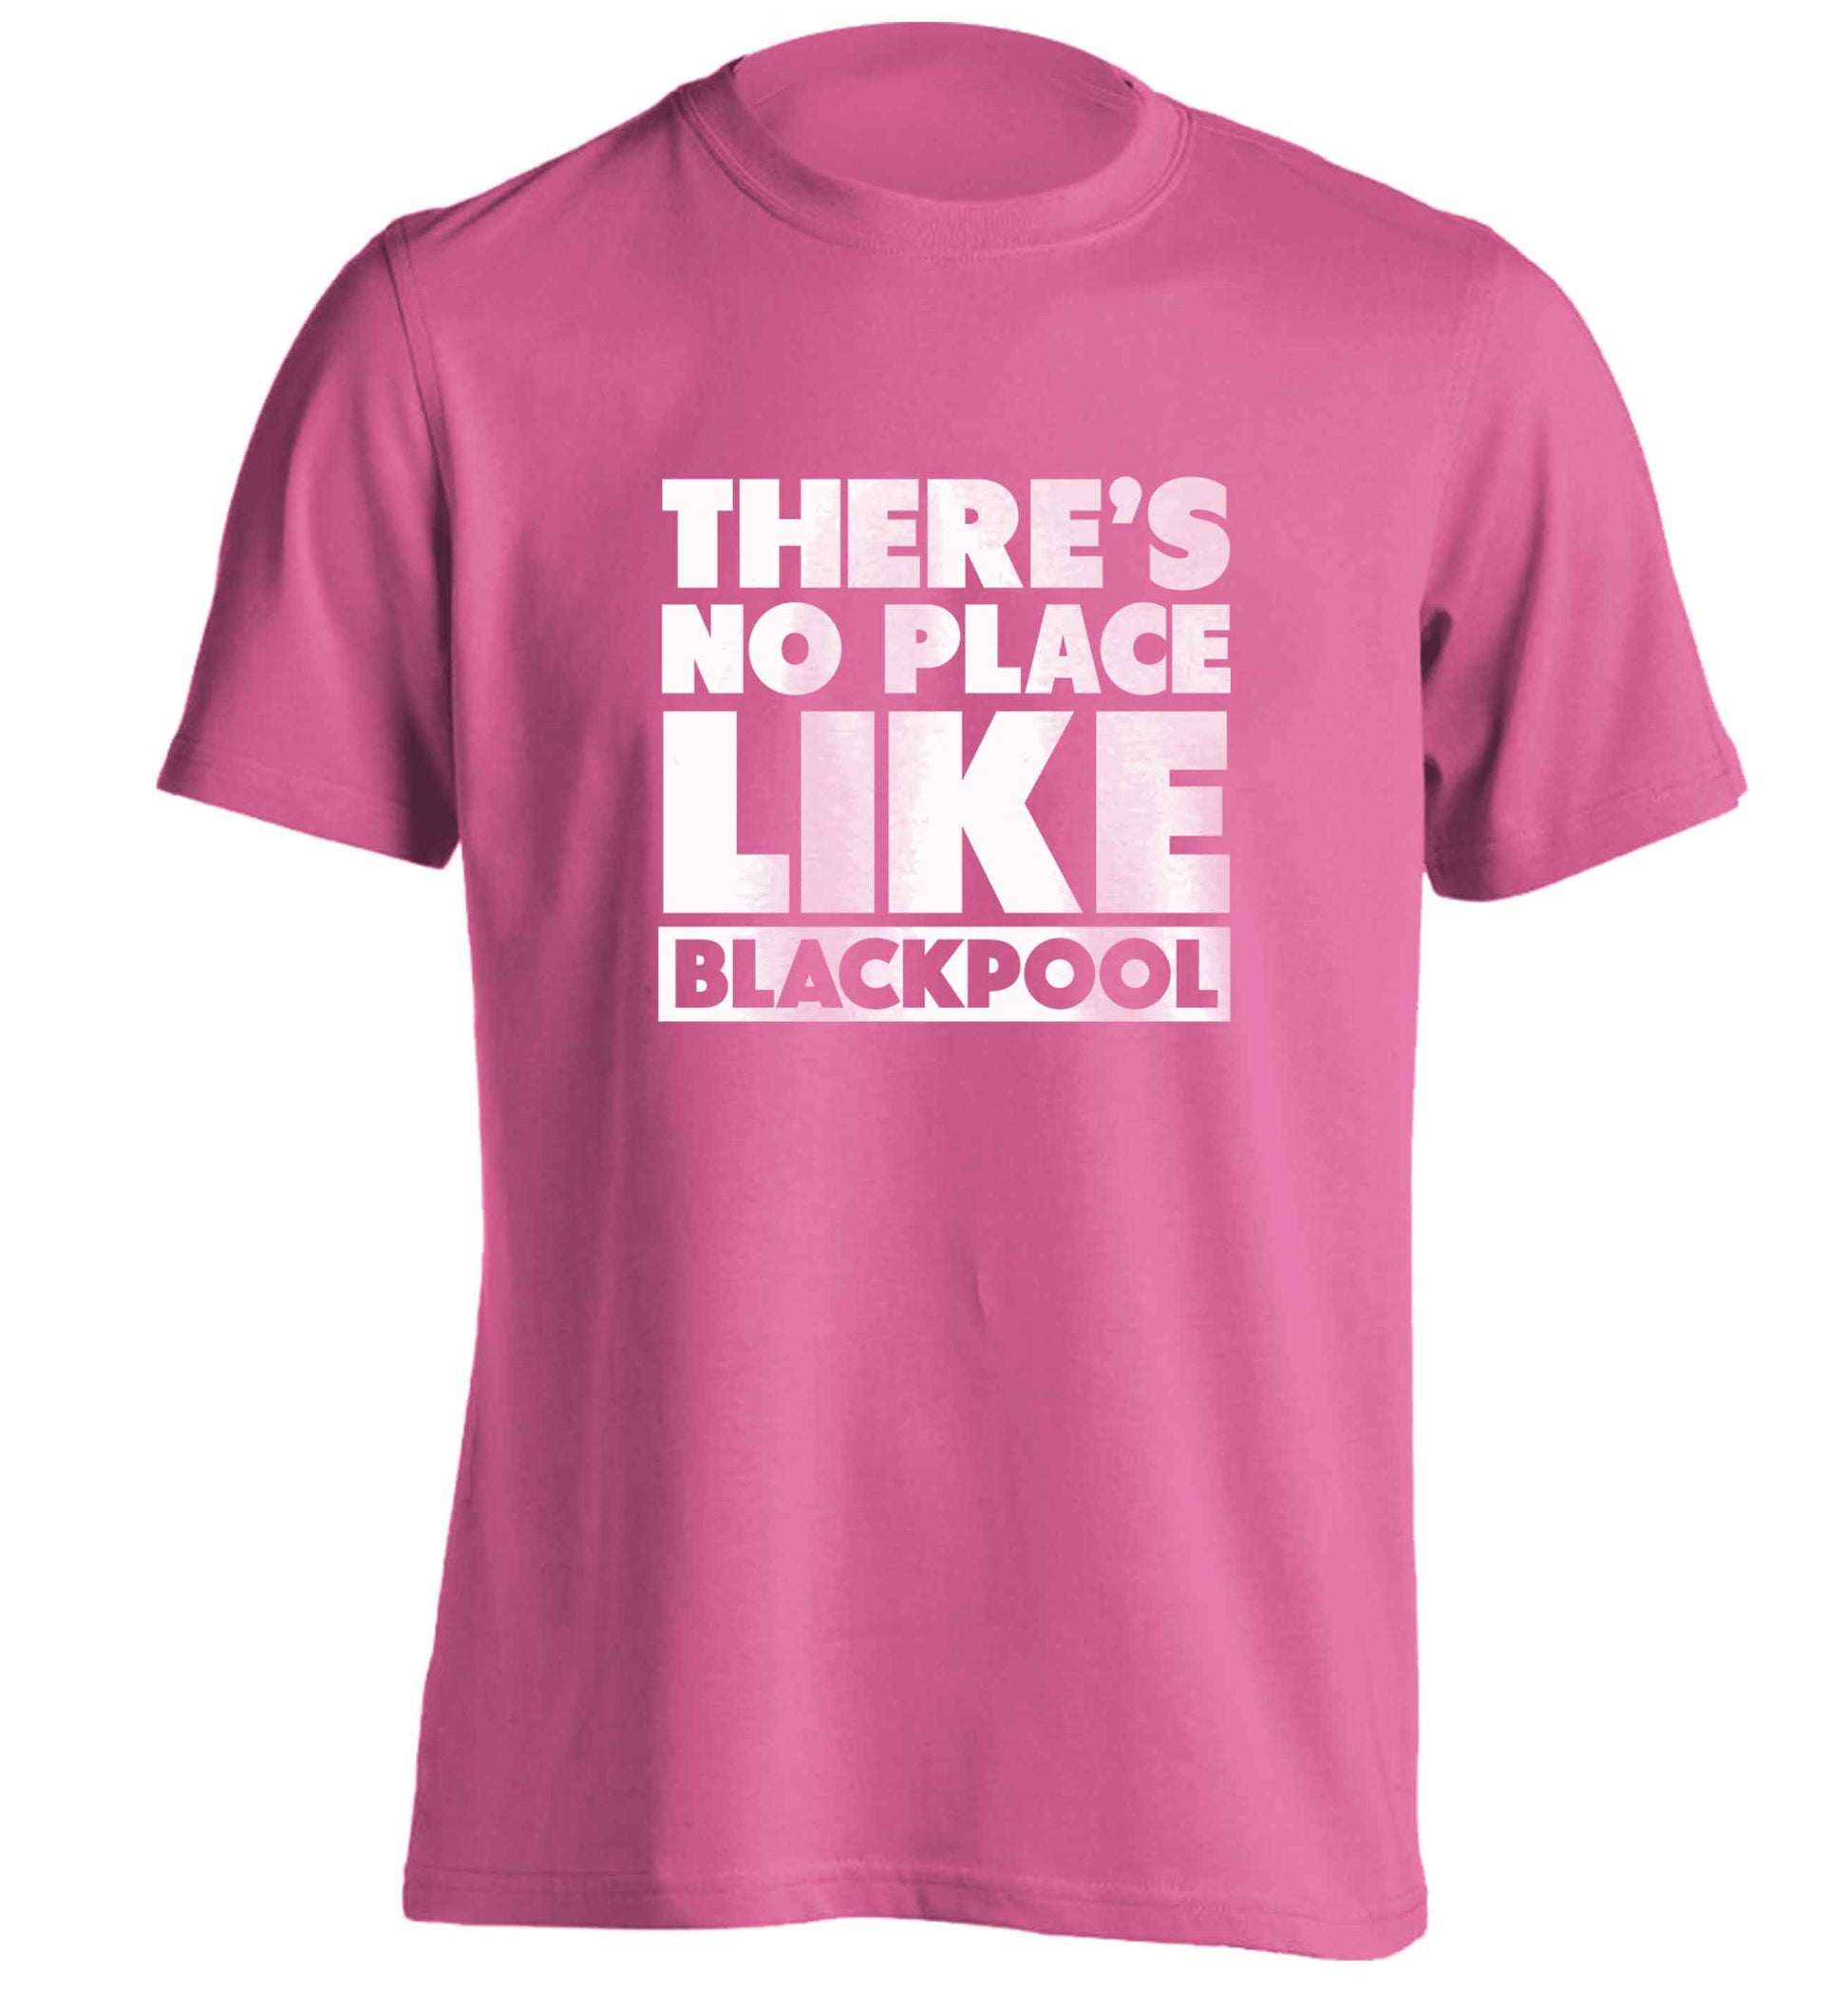 There's no place like Blackpool adults unisex pink Tshirt 2XL